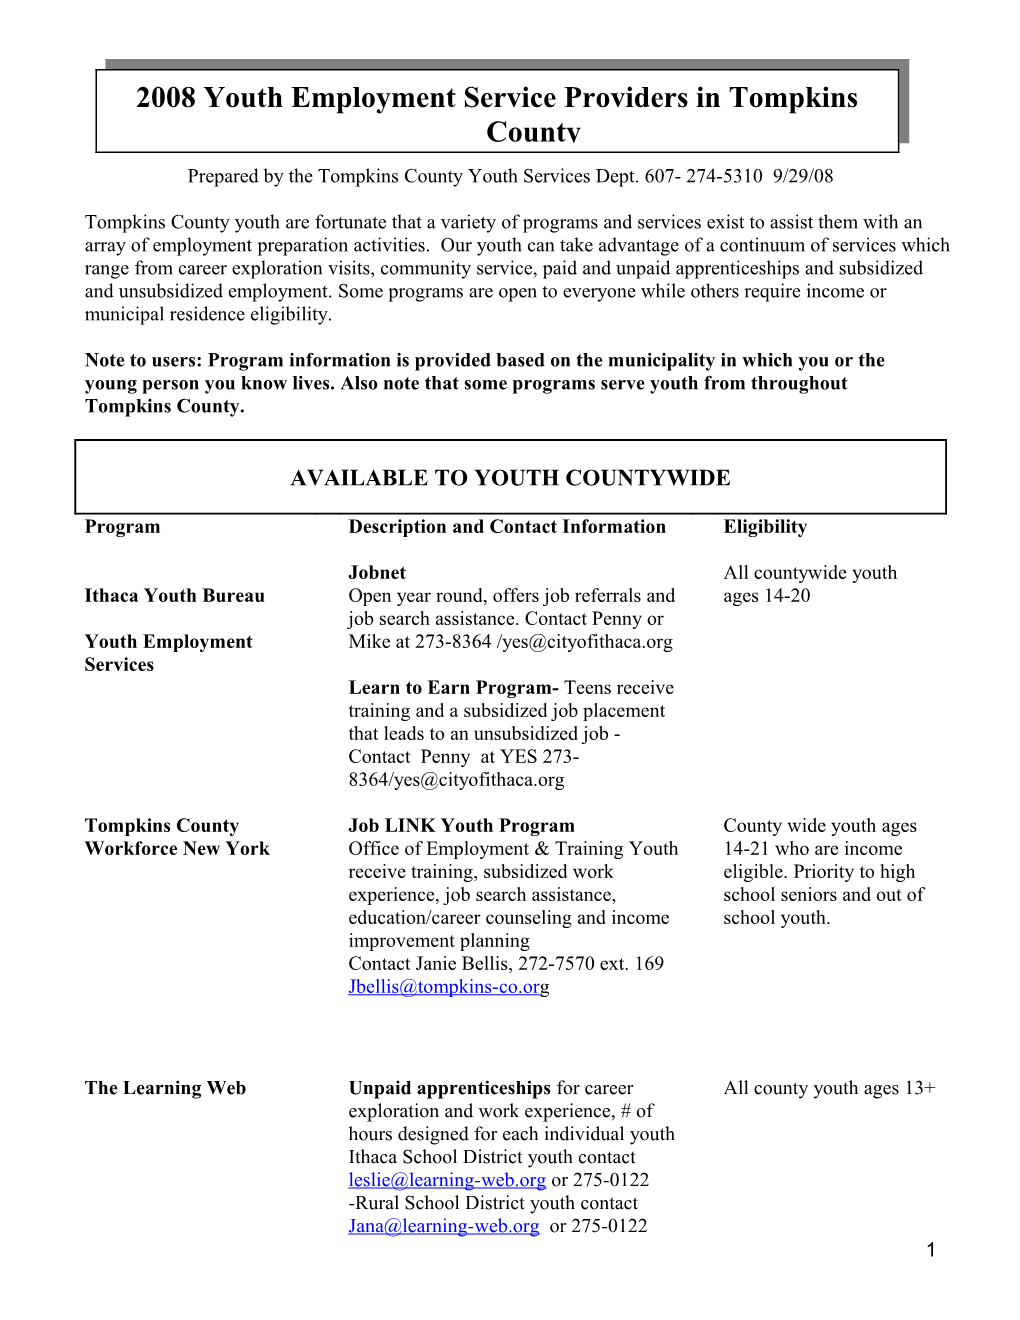 Summer 2003 Youth Employment in Tompkins County